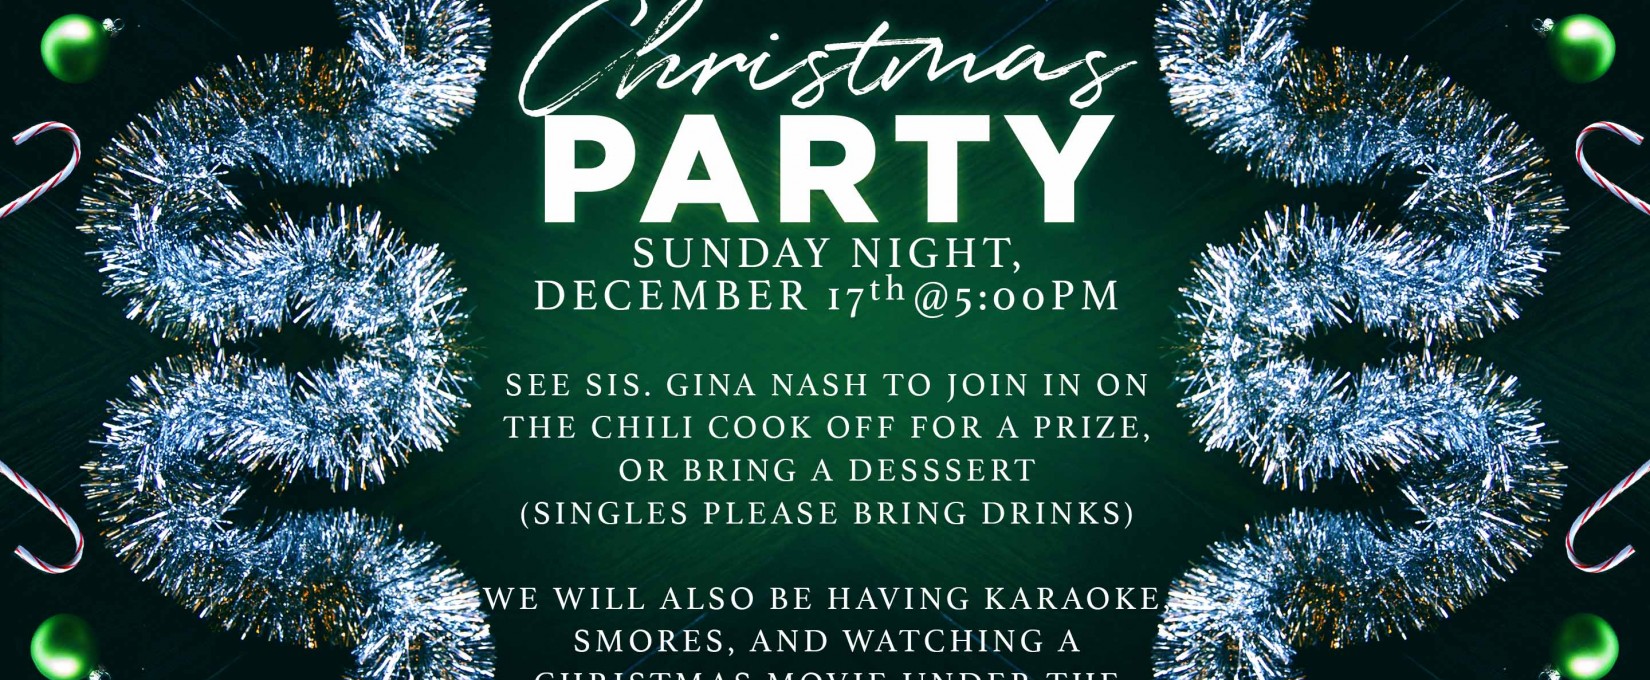 All Church Christmas Party The Pentecostals of Cooper City